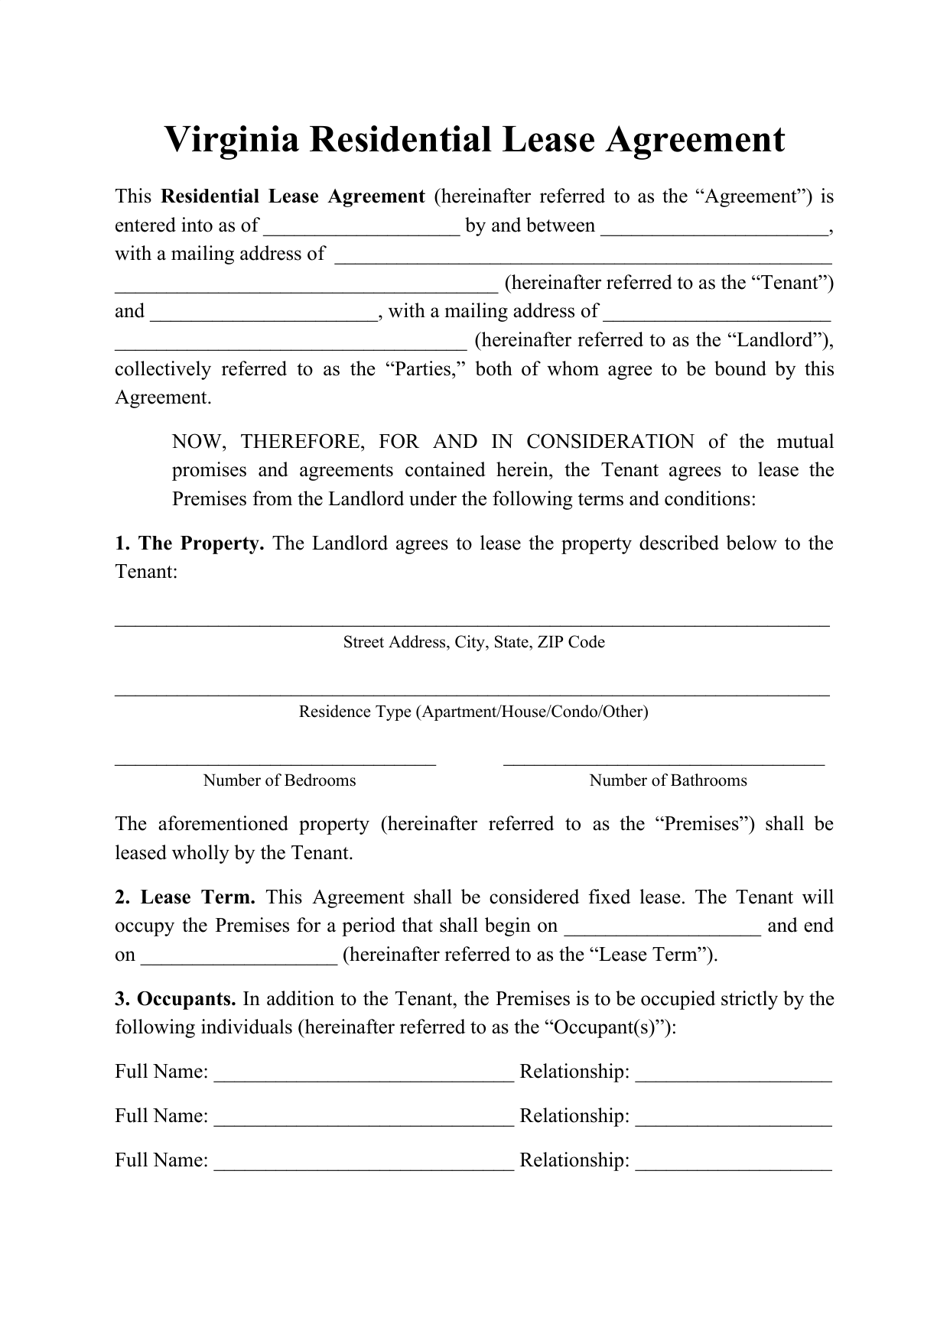 fillable-form-lease-agreement-printable-forms-free-online